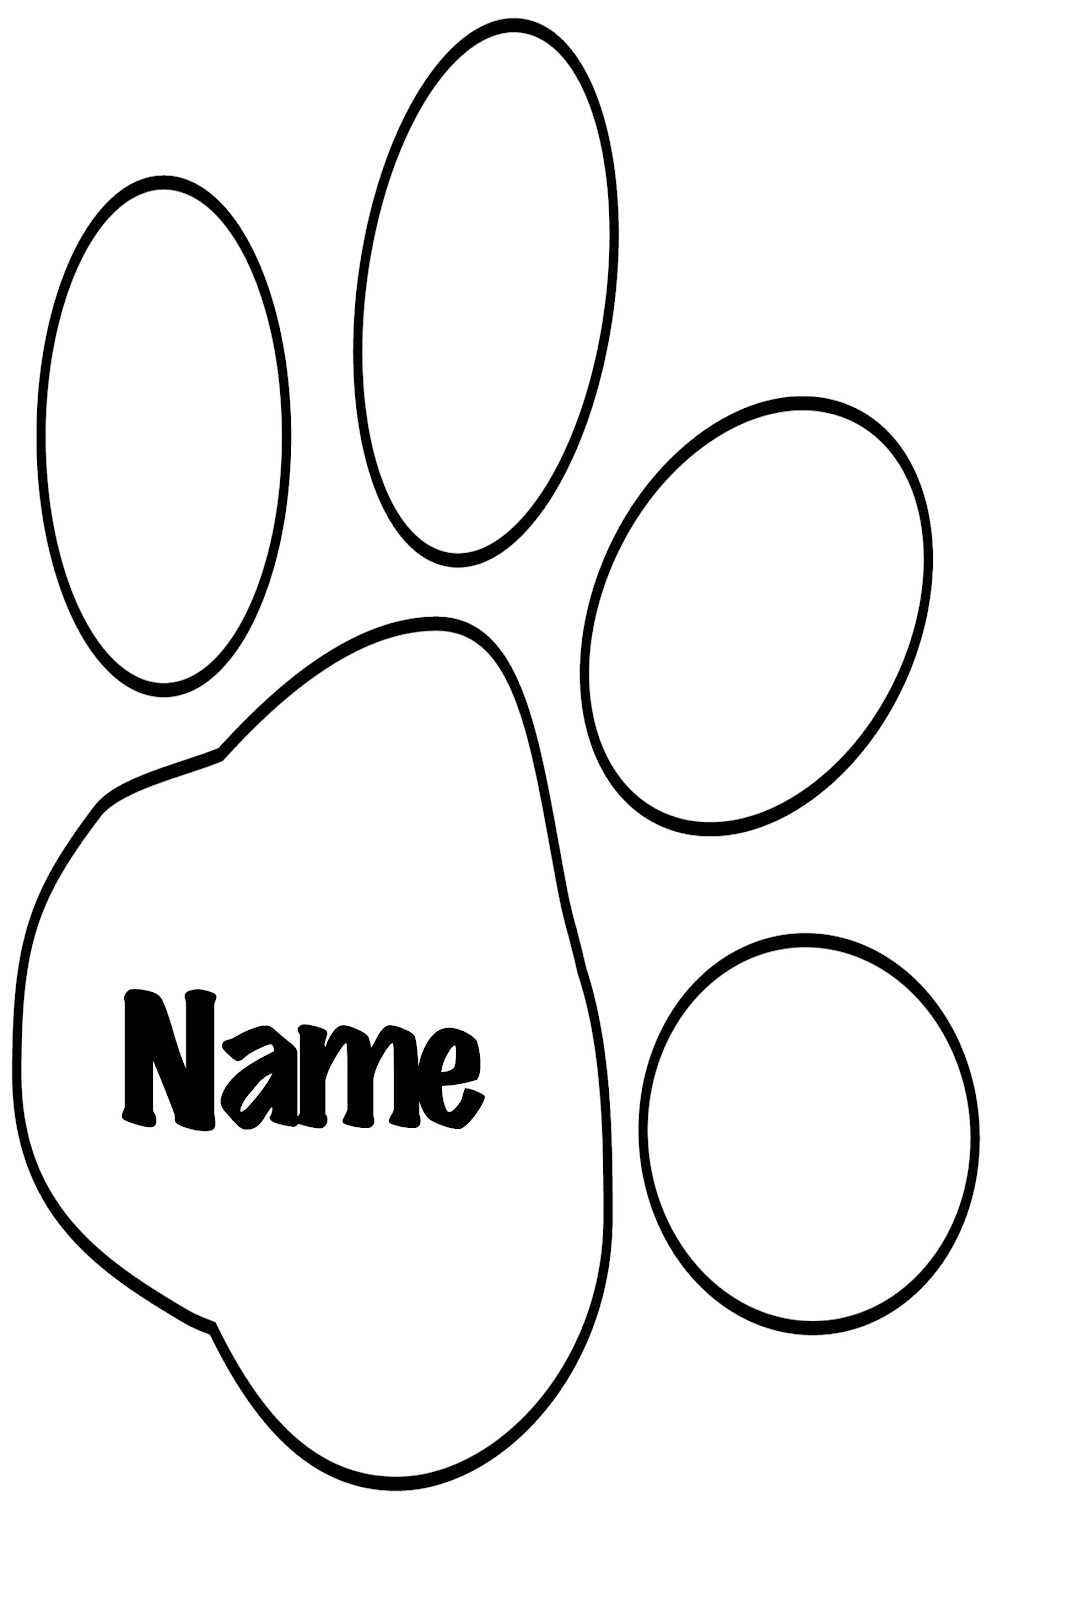 Amazing Paw Print Coloring Pages 21 For Coloring For Kids With Paw ...